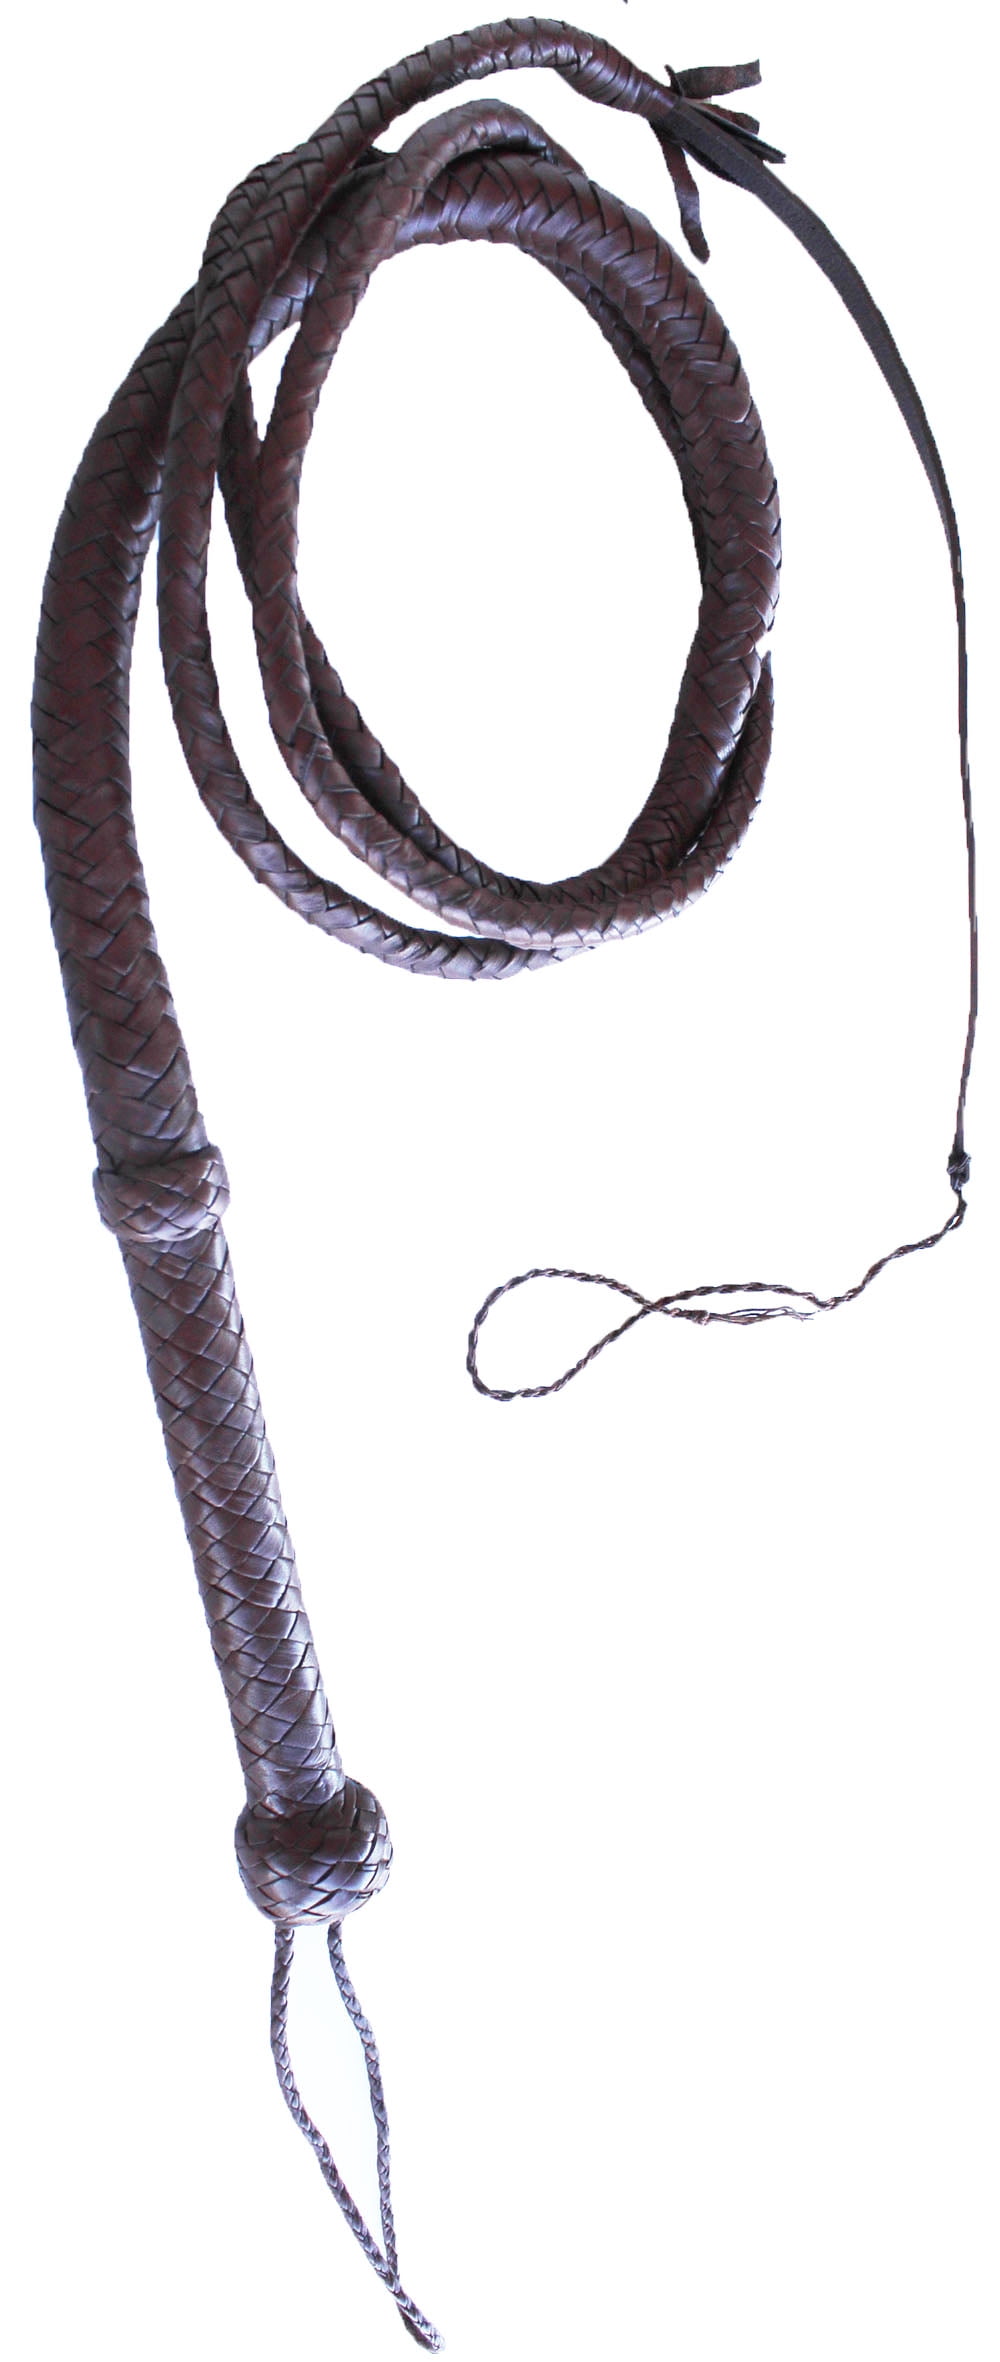 Snake whip 12 Plait Leather  bullwhip Self Defence whip 2 Foot to 8 Foot 